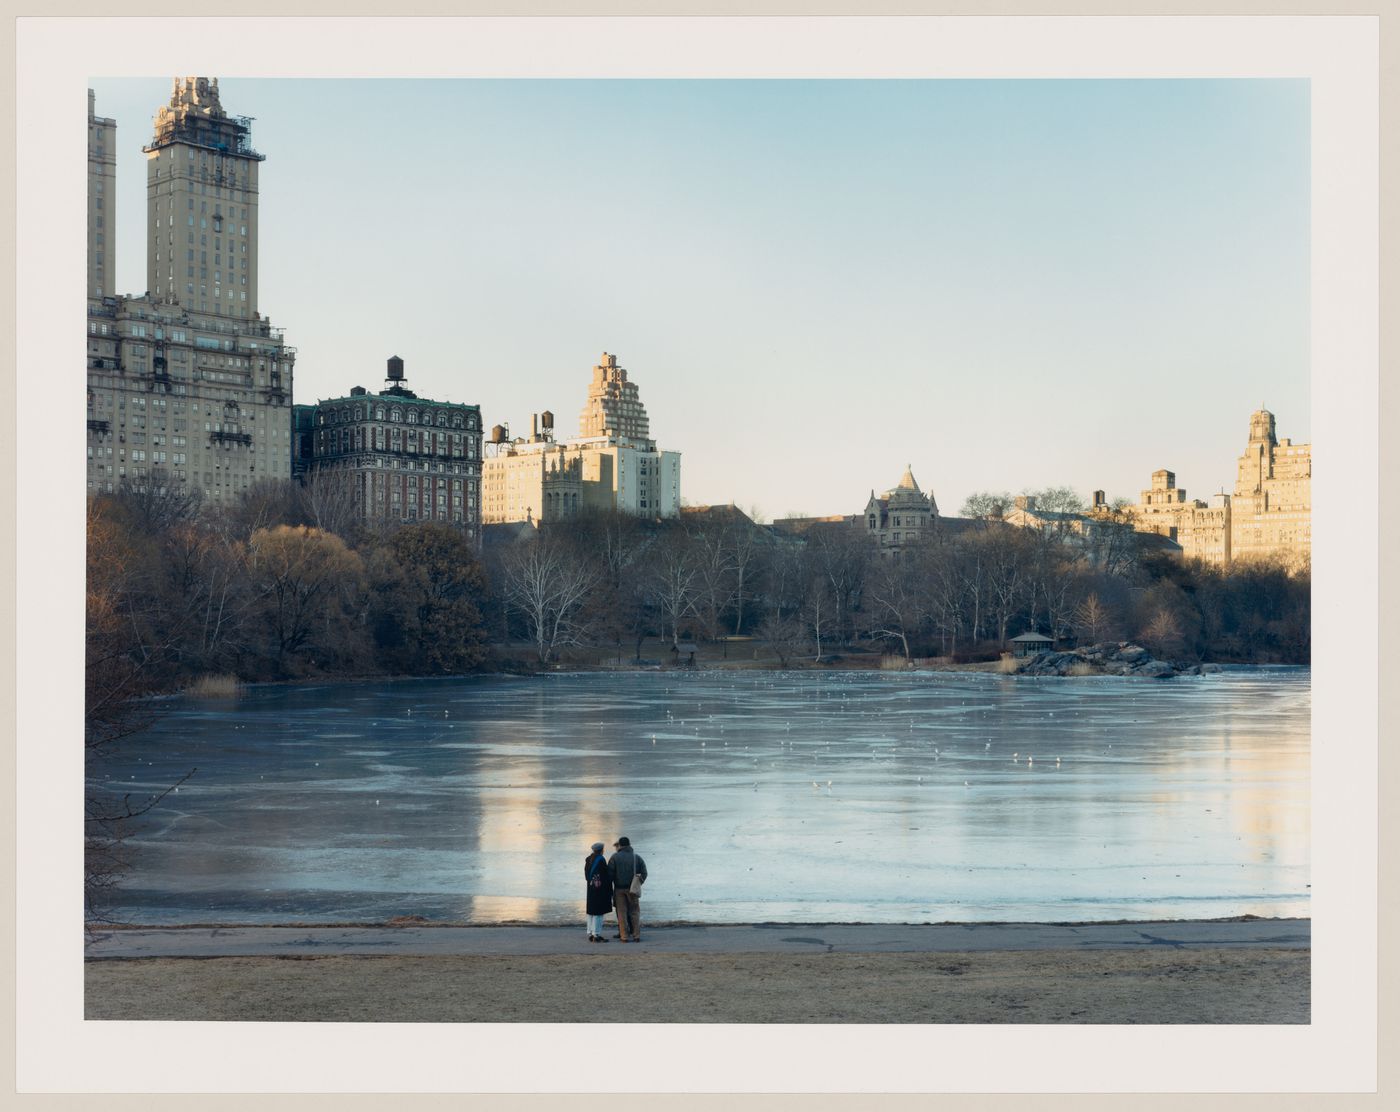 Viewing Olmsted: View of The Lake, Central Park, New York City, New York